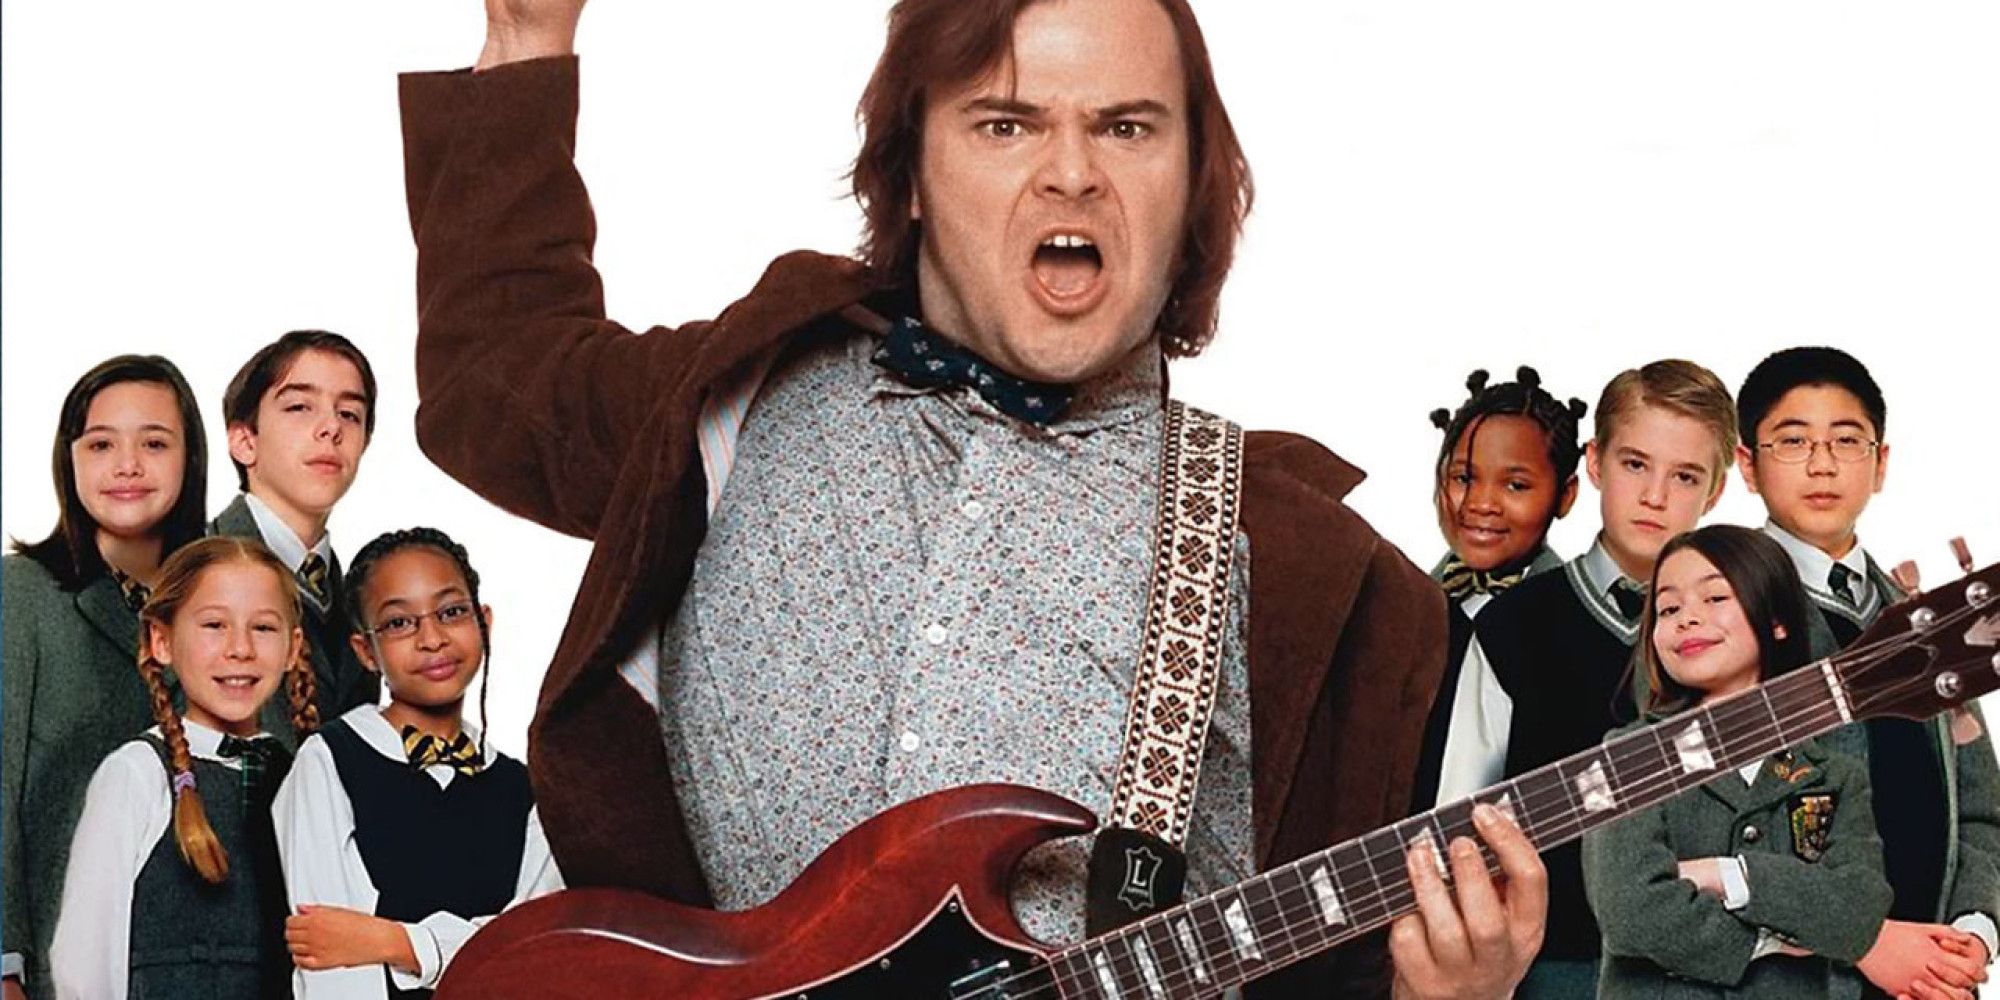 Jack Black and kids on the School of Rock poster